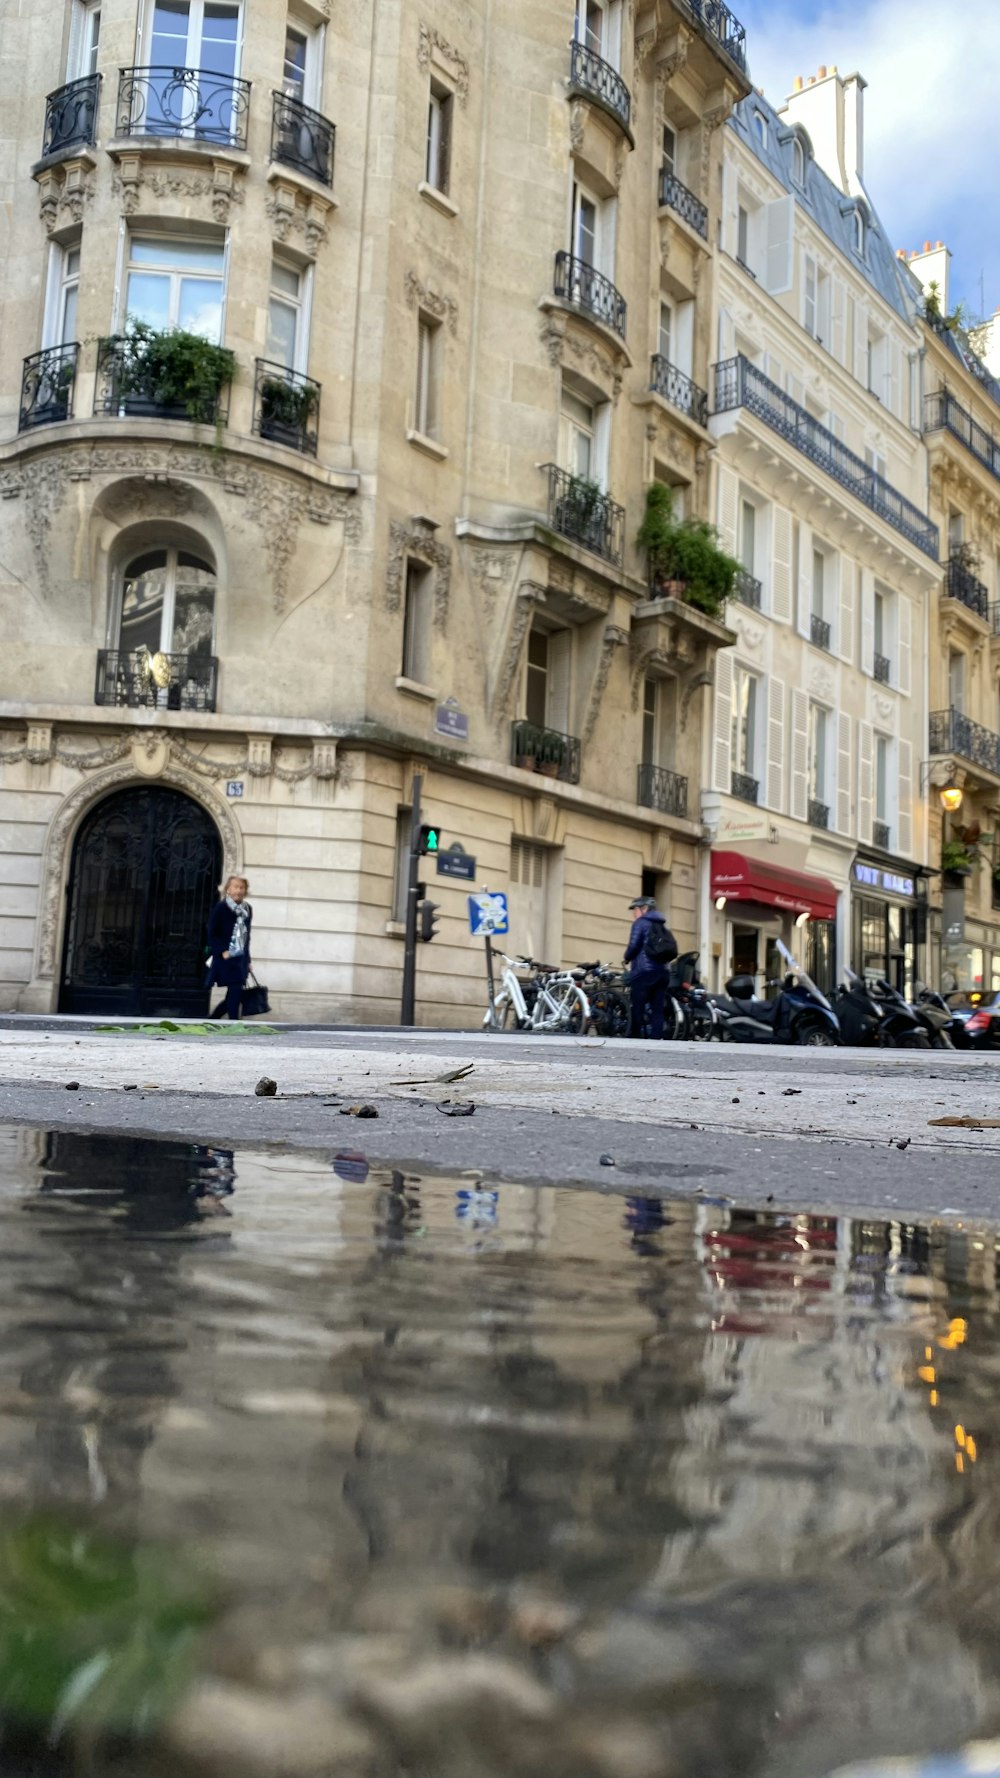 a street scene with focus on a puddle of water